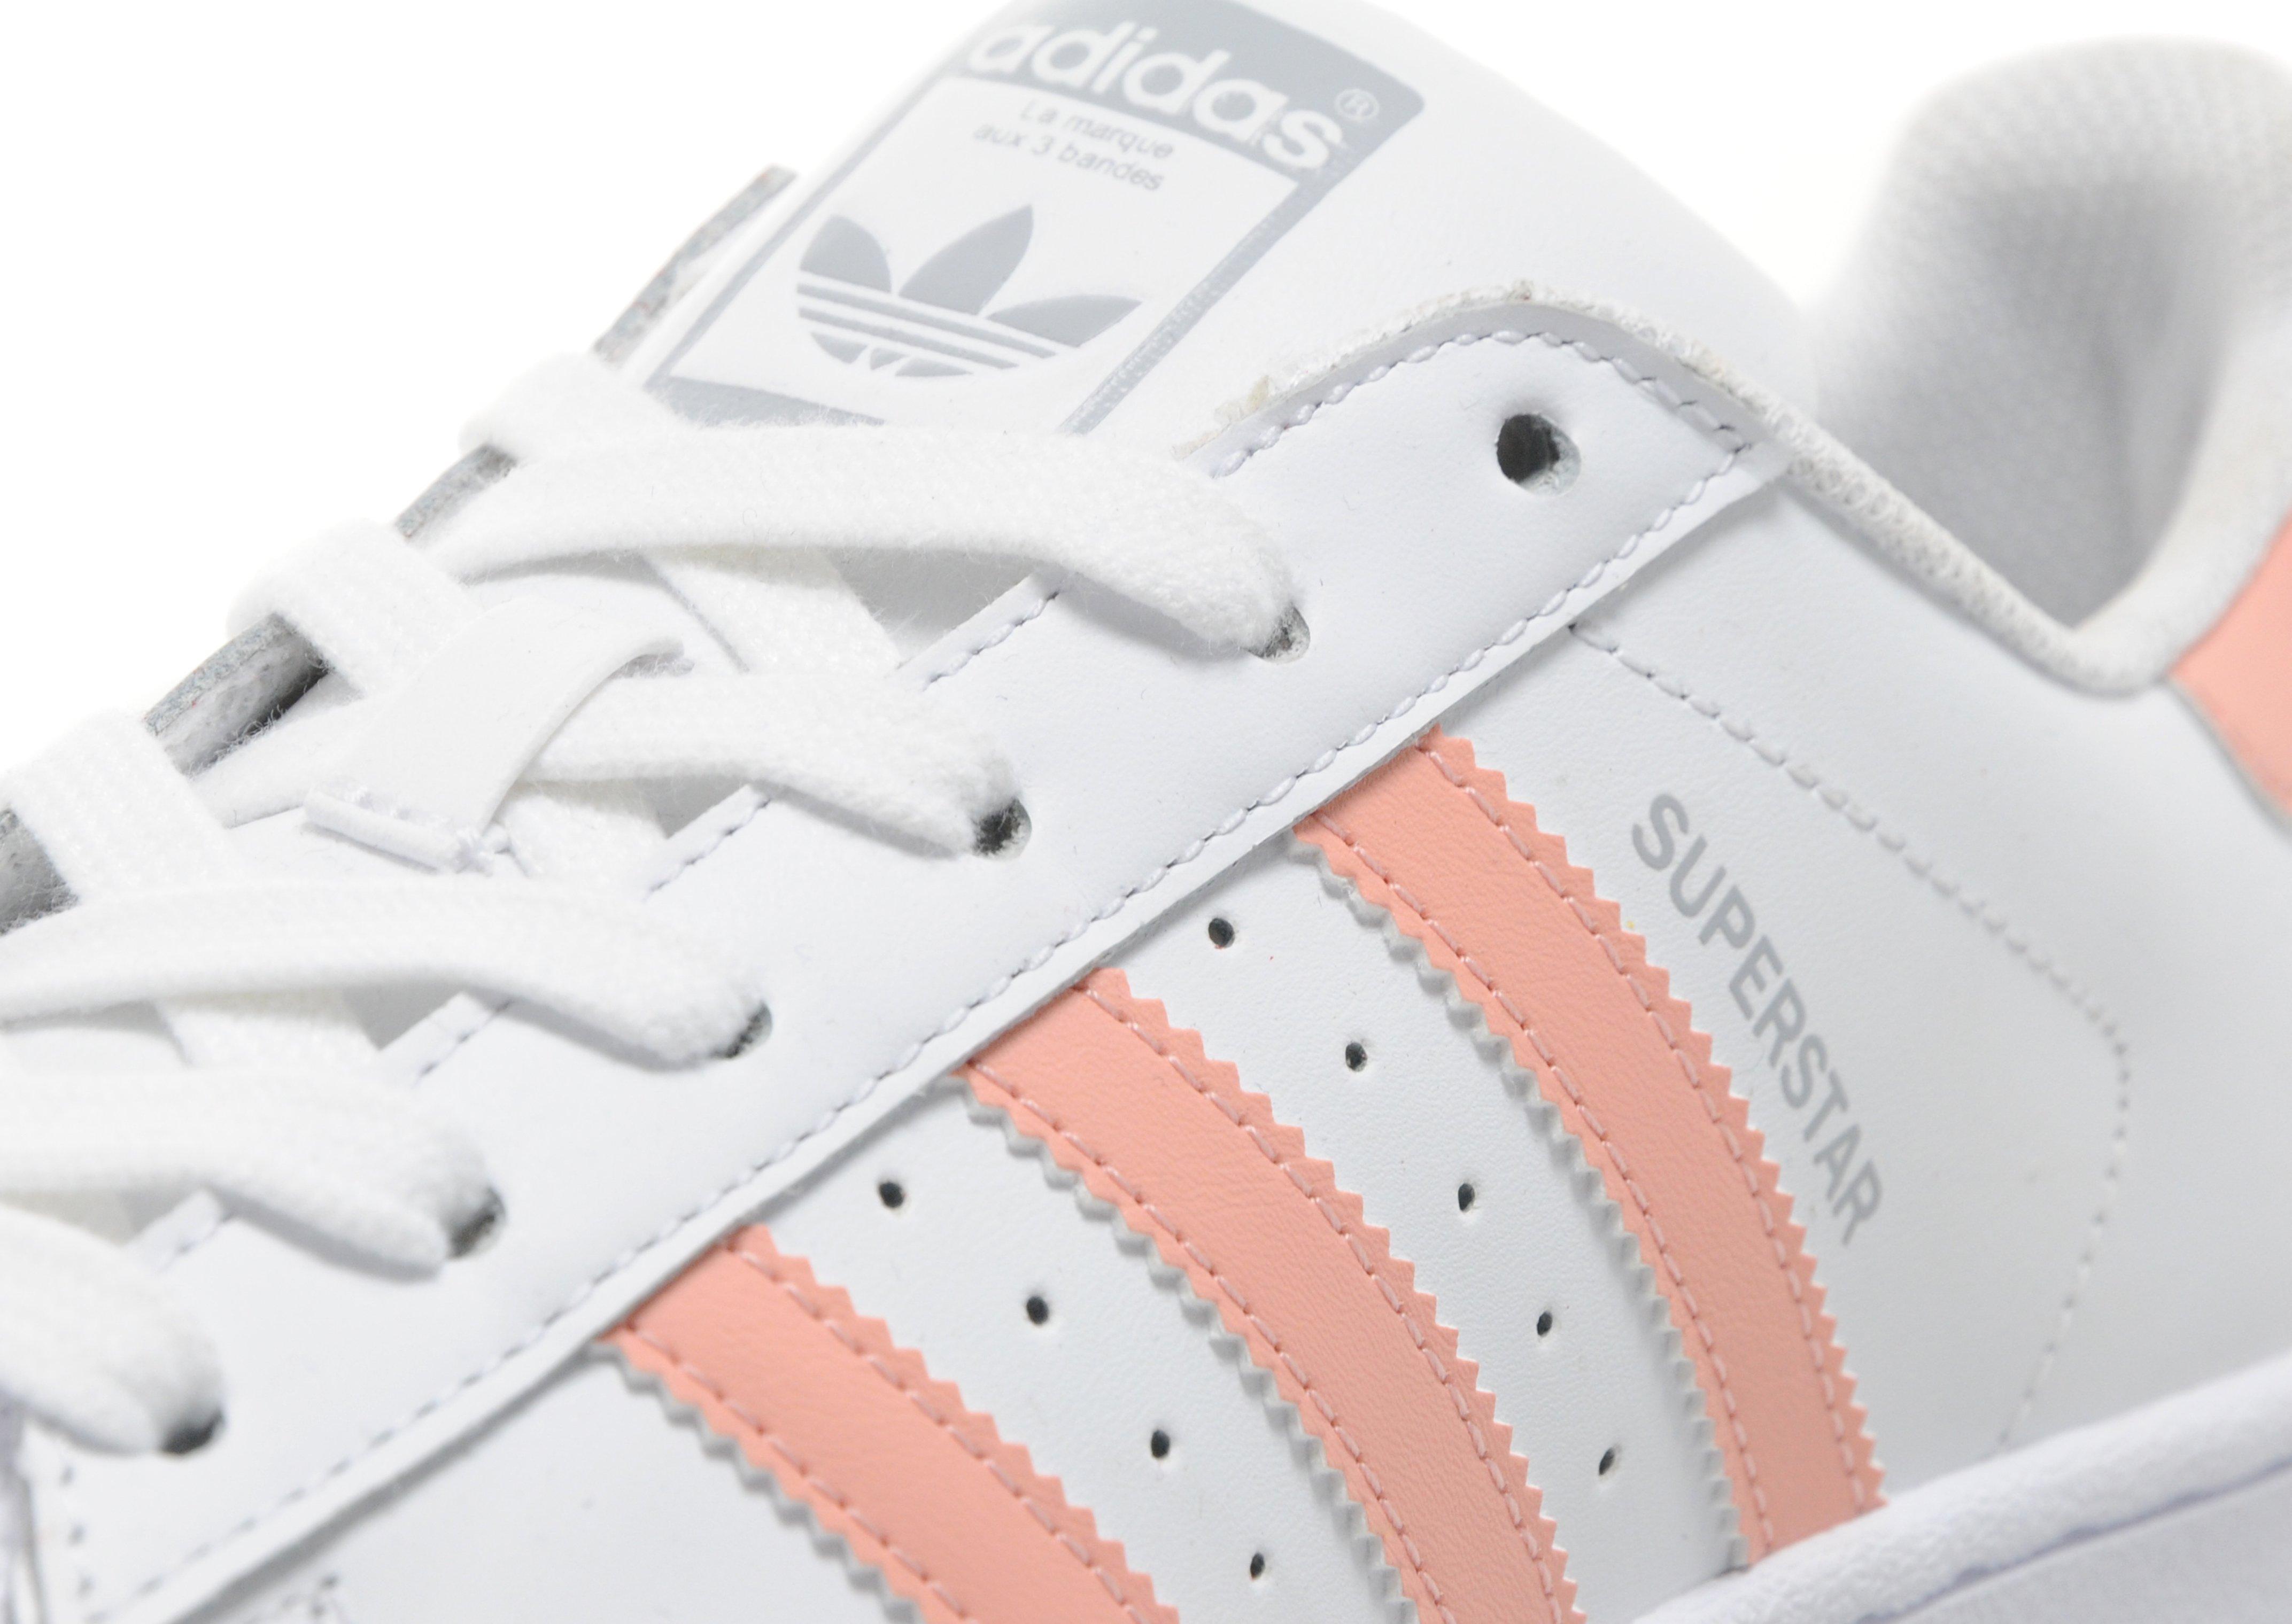 adidas white and peach shoes